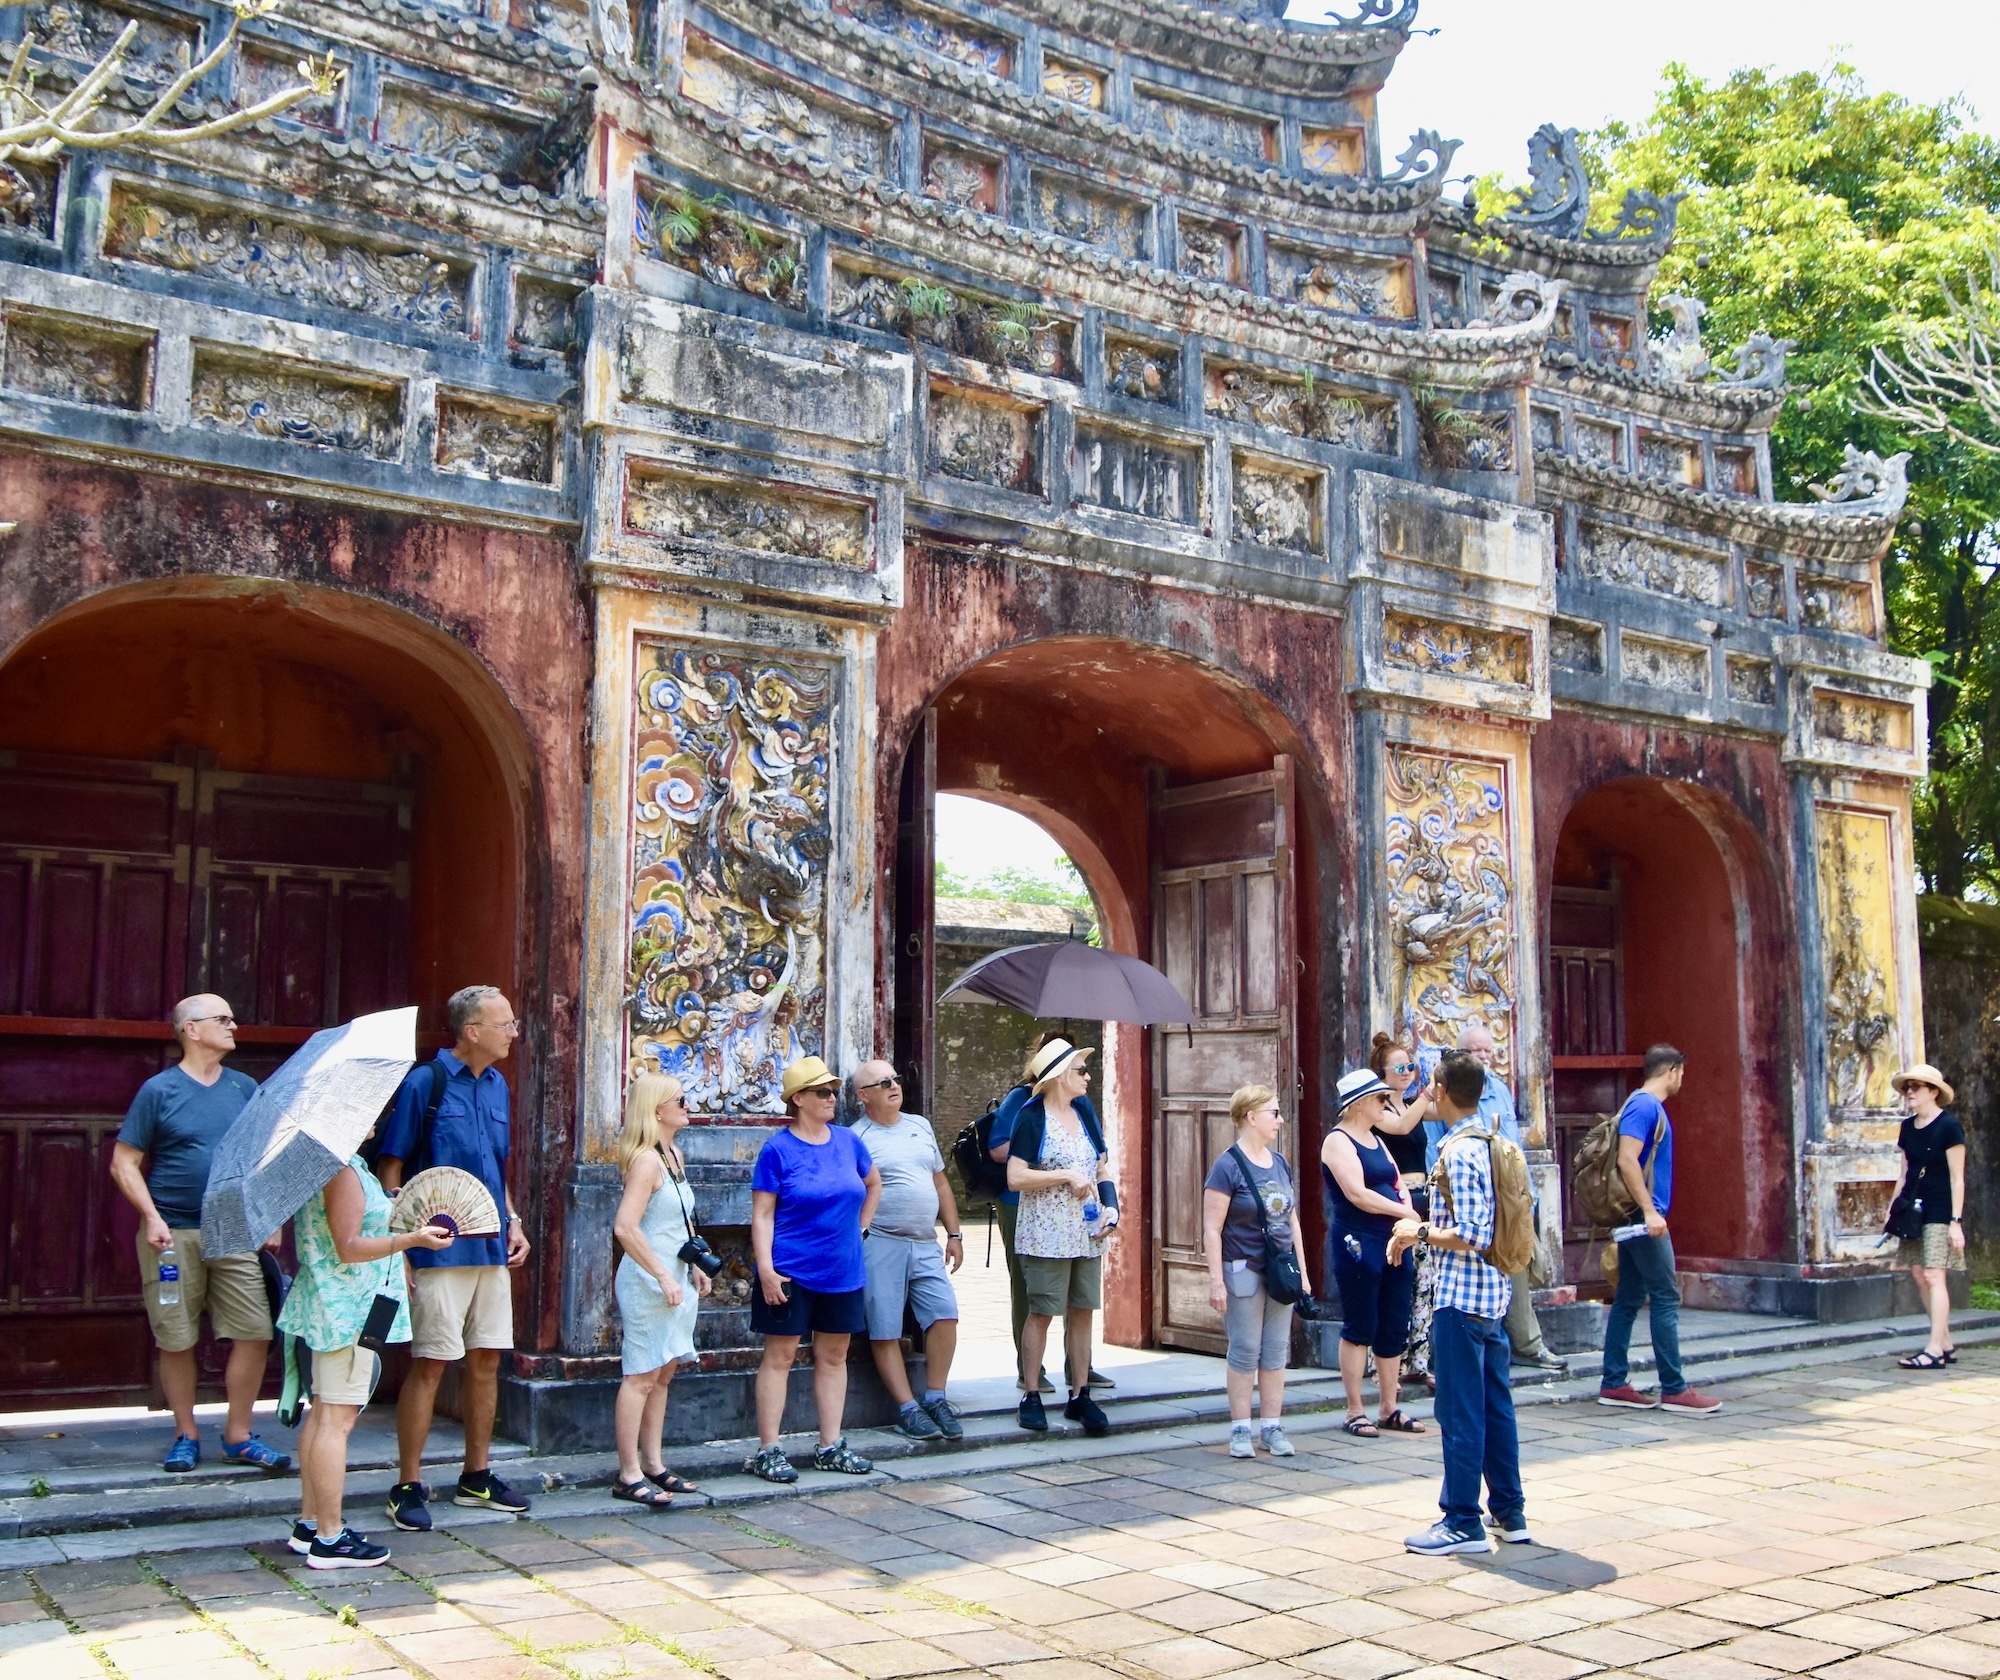 Inside the Imperial City of Hue